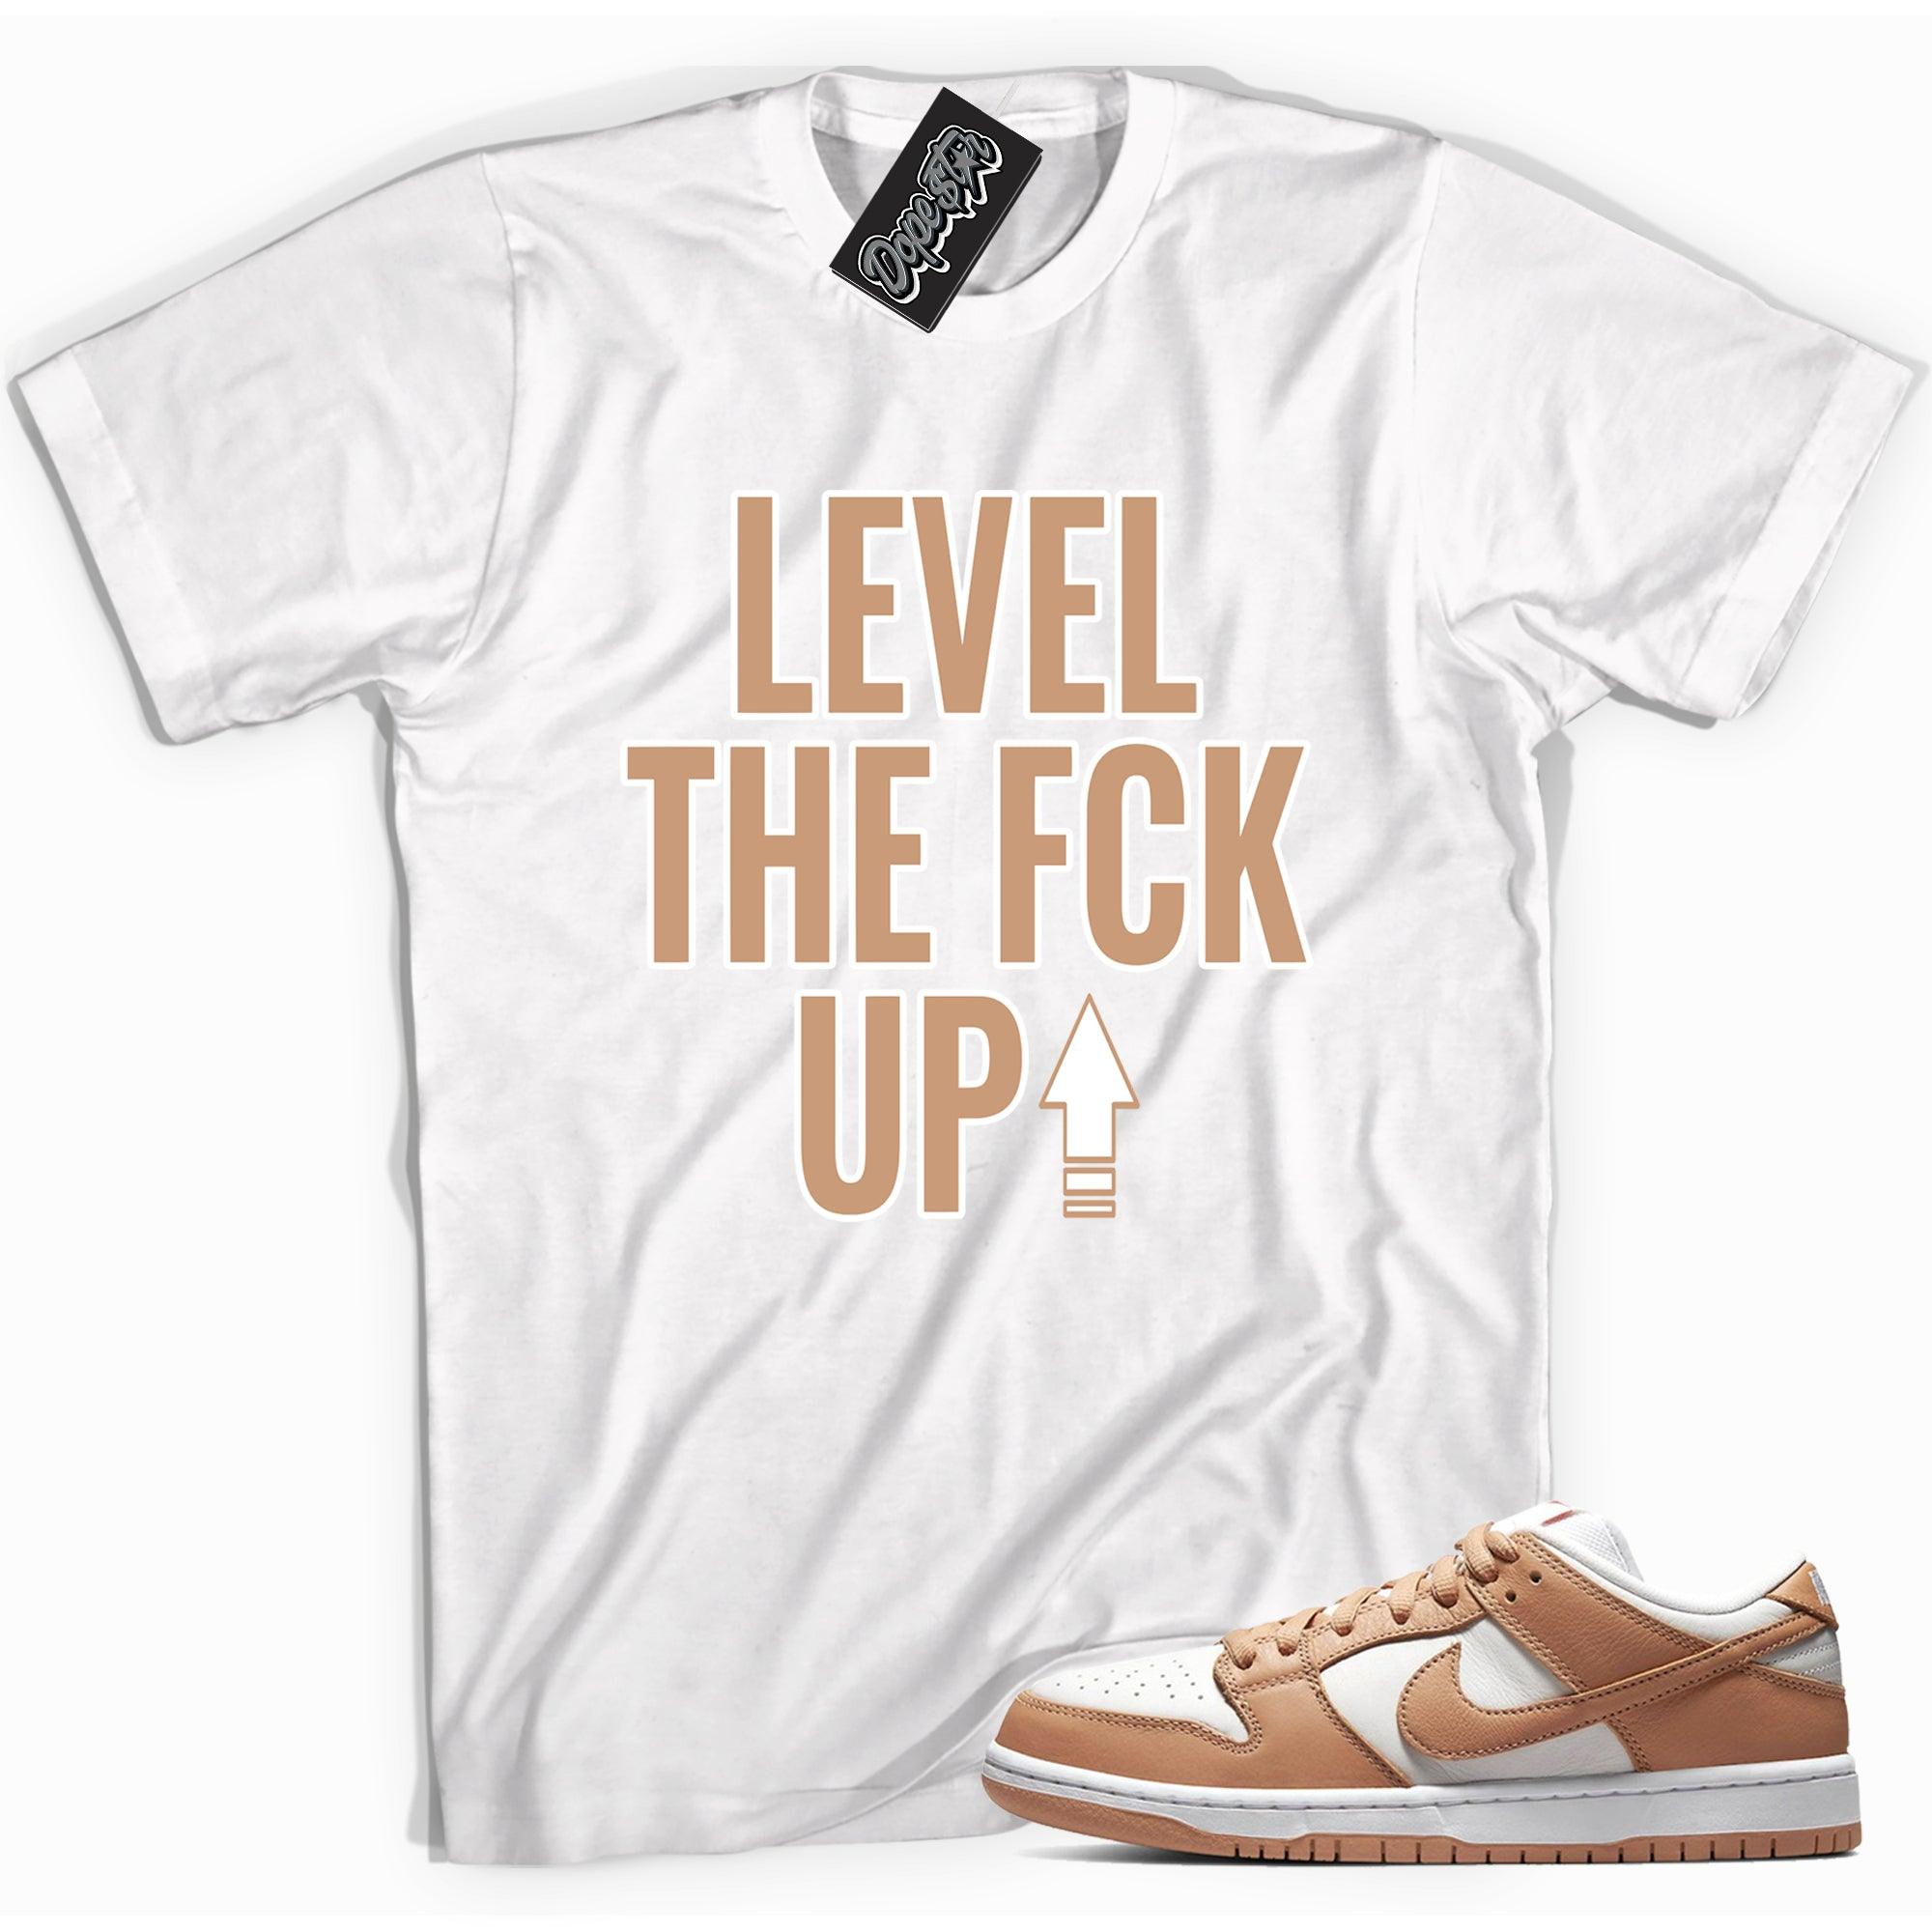 Cool white graphic tee with 'Level Up' print, that perfectly matches Nike Dunk Low Light Cognac sneakers.